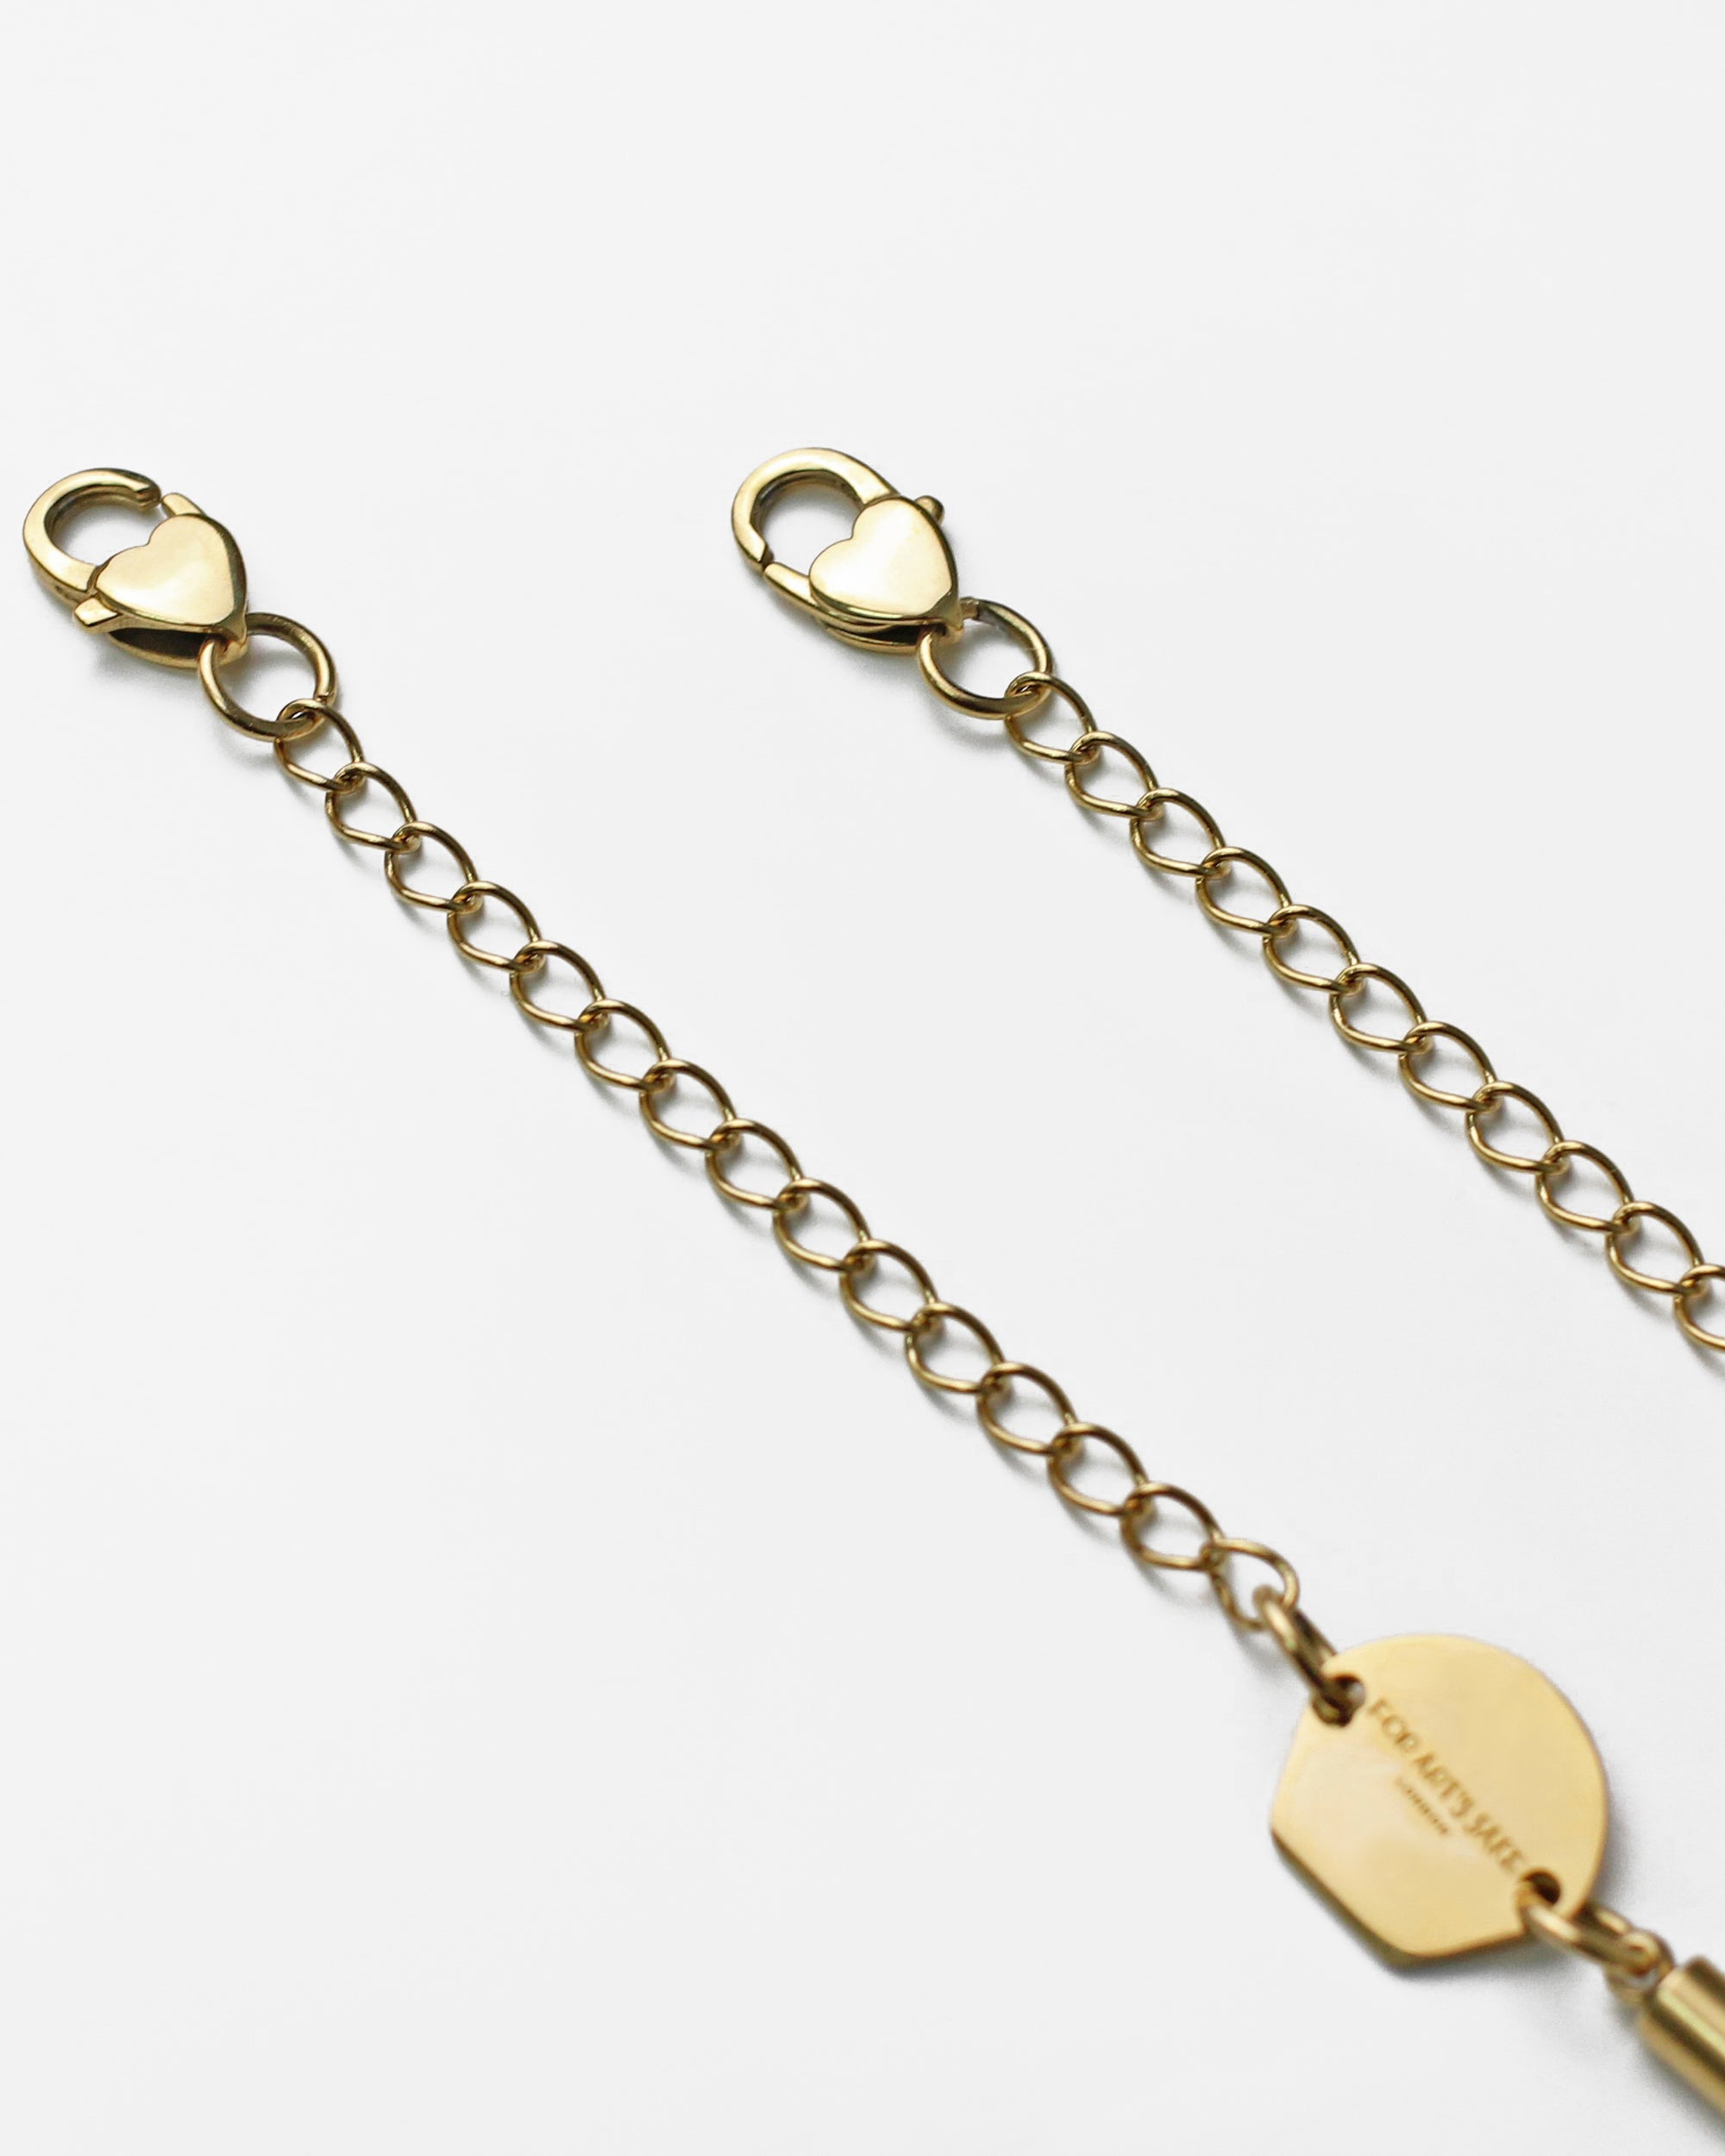 Close-up of an 18k gold-plated For Art&#39;s Sake® Mayfair Glasses Chain with circular links and two heart-shaped claw closures on each end. A small round charm bearing the word &quot;COACH&quot; is attached near one clasp. The chain lies on a plain white background.